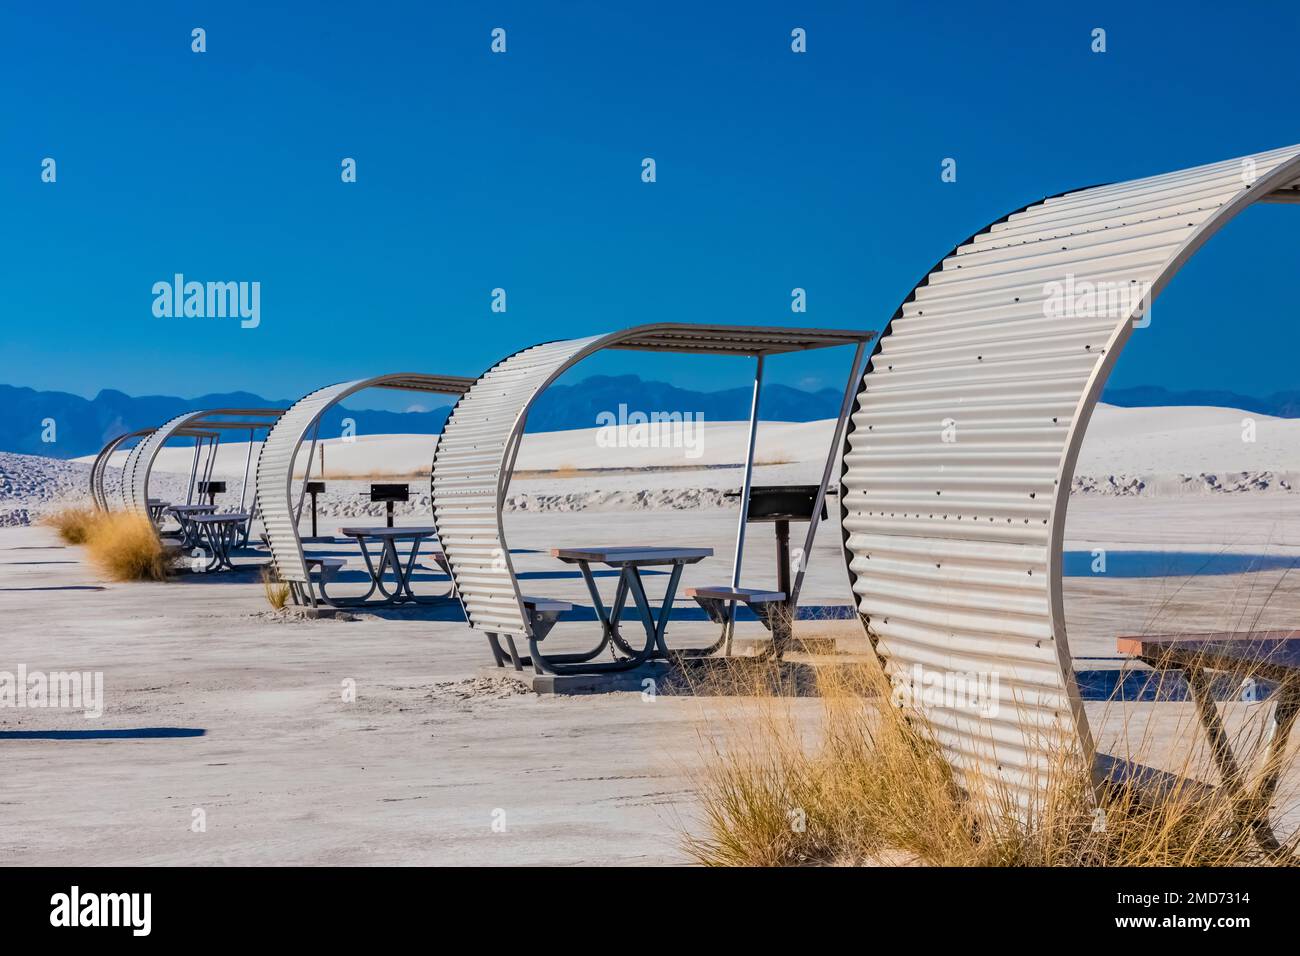 Aluminum picnic shelters were designed by NPS architect Lyle E. Bennett in White Sands National Park, New Mexico, USA Stock Photo